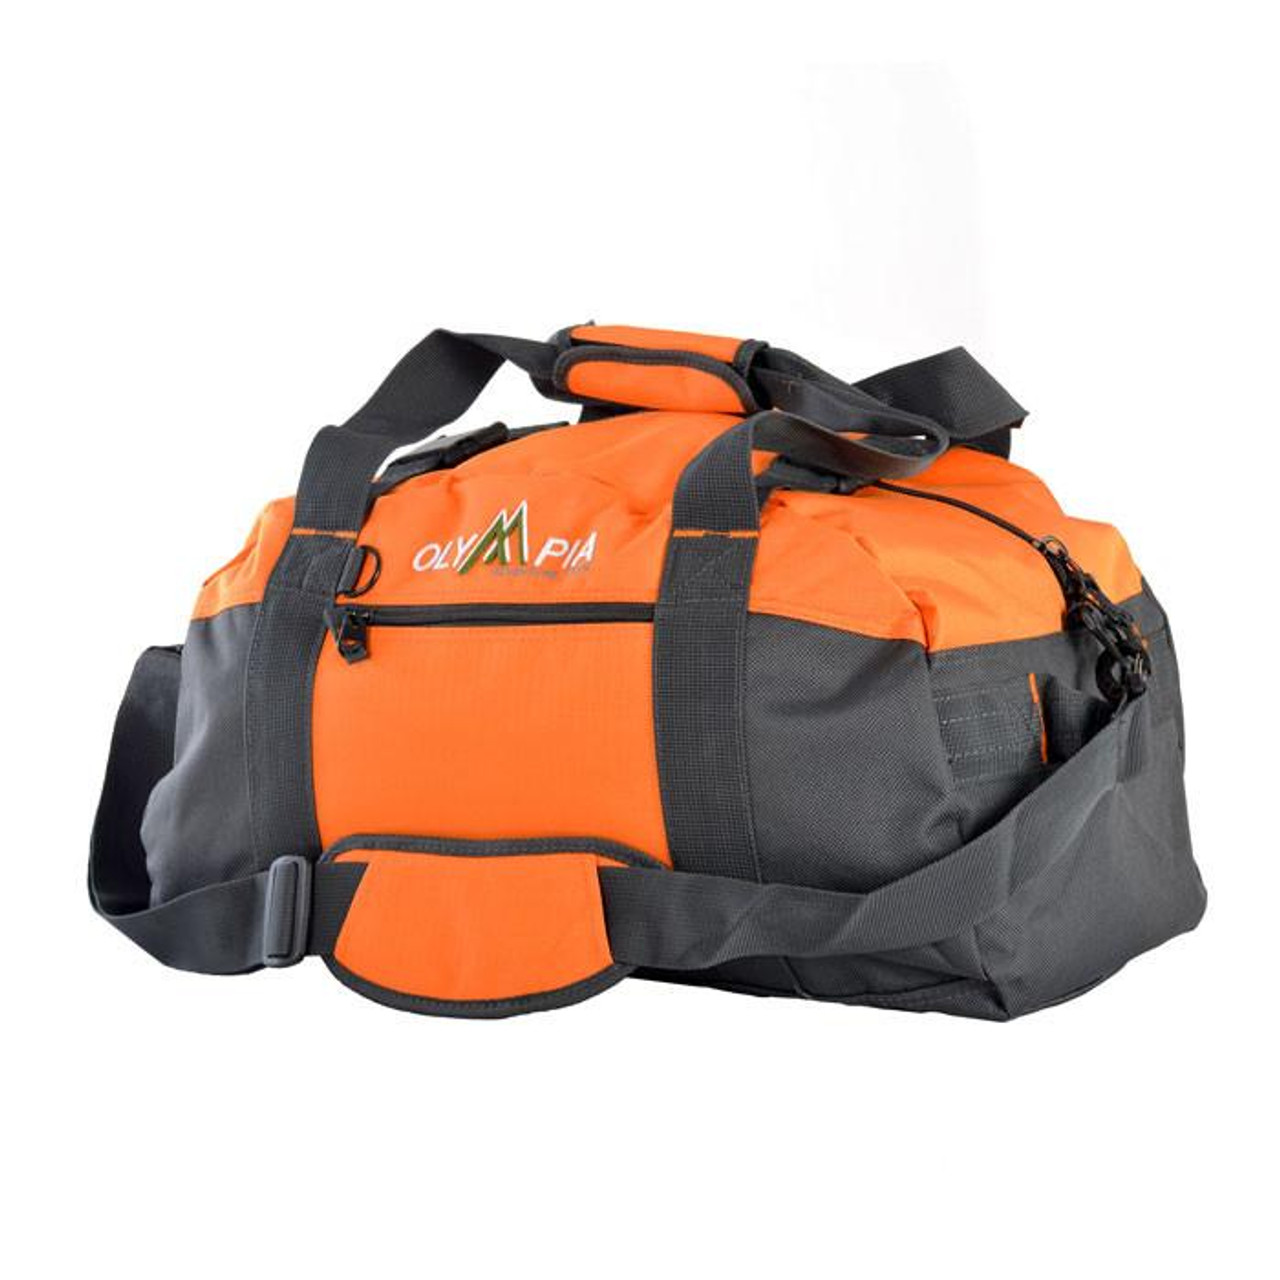 Olympia USA Foldable Ripstop Sports Duffel product image